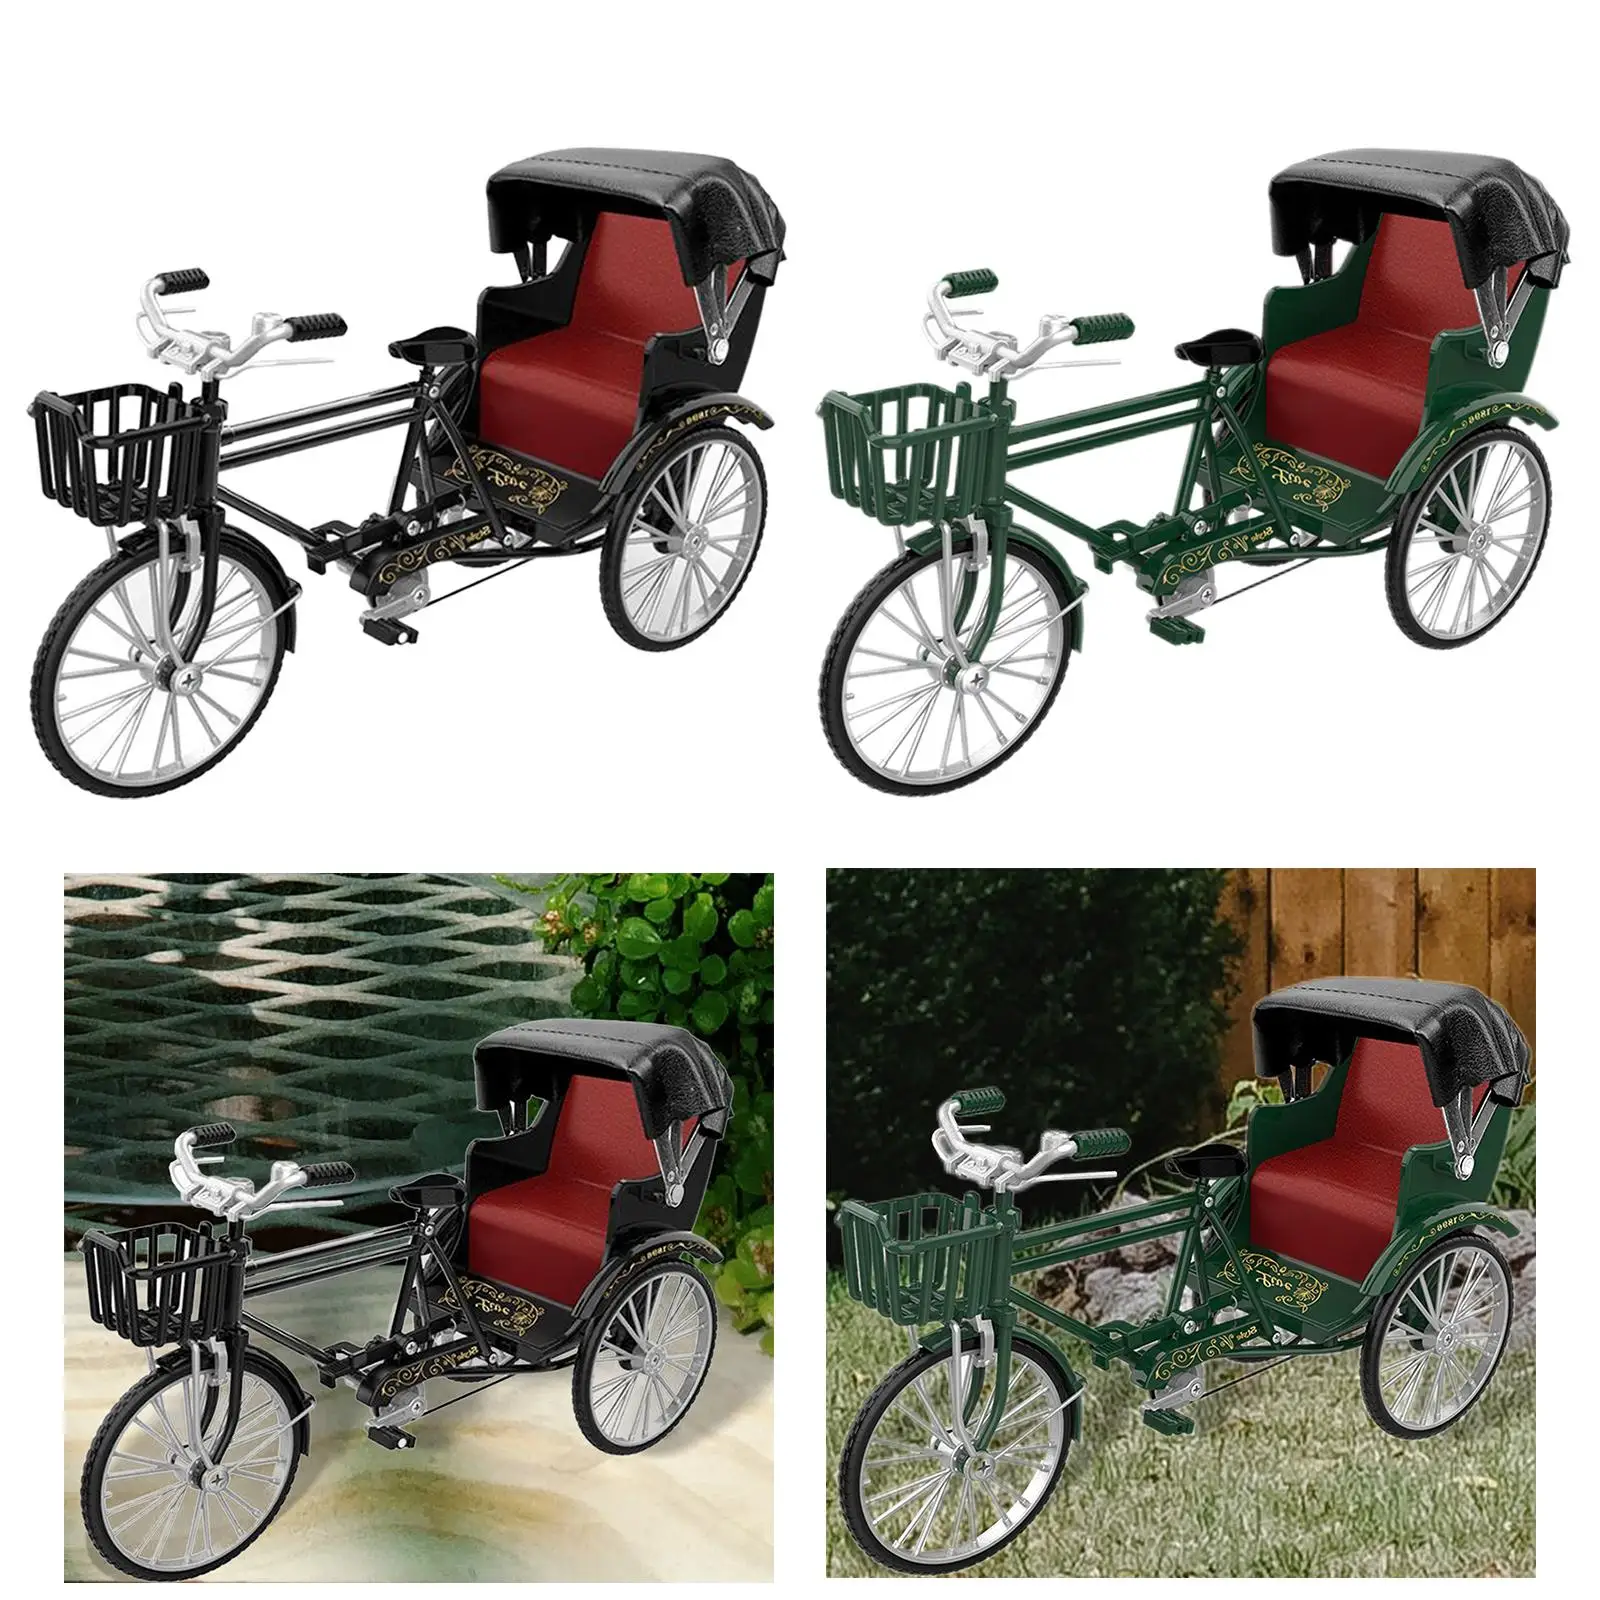 Retro Style 1:12 Scale Tricycle Model Collectibles Model Decor Dollhouse Collection Building Miniature Sculpture for Children